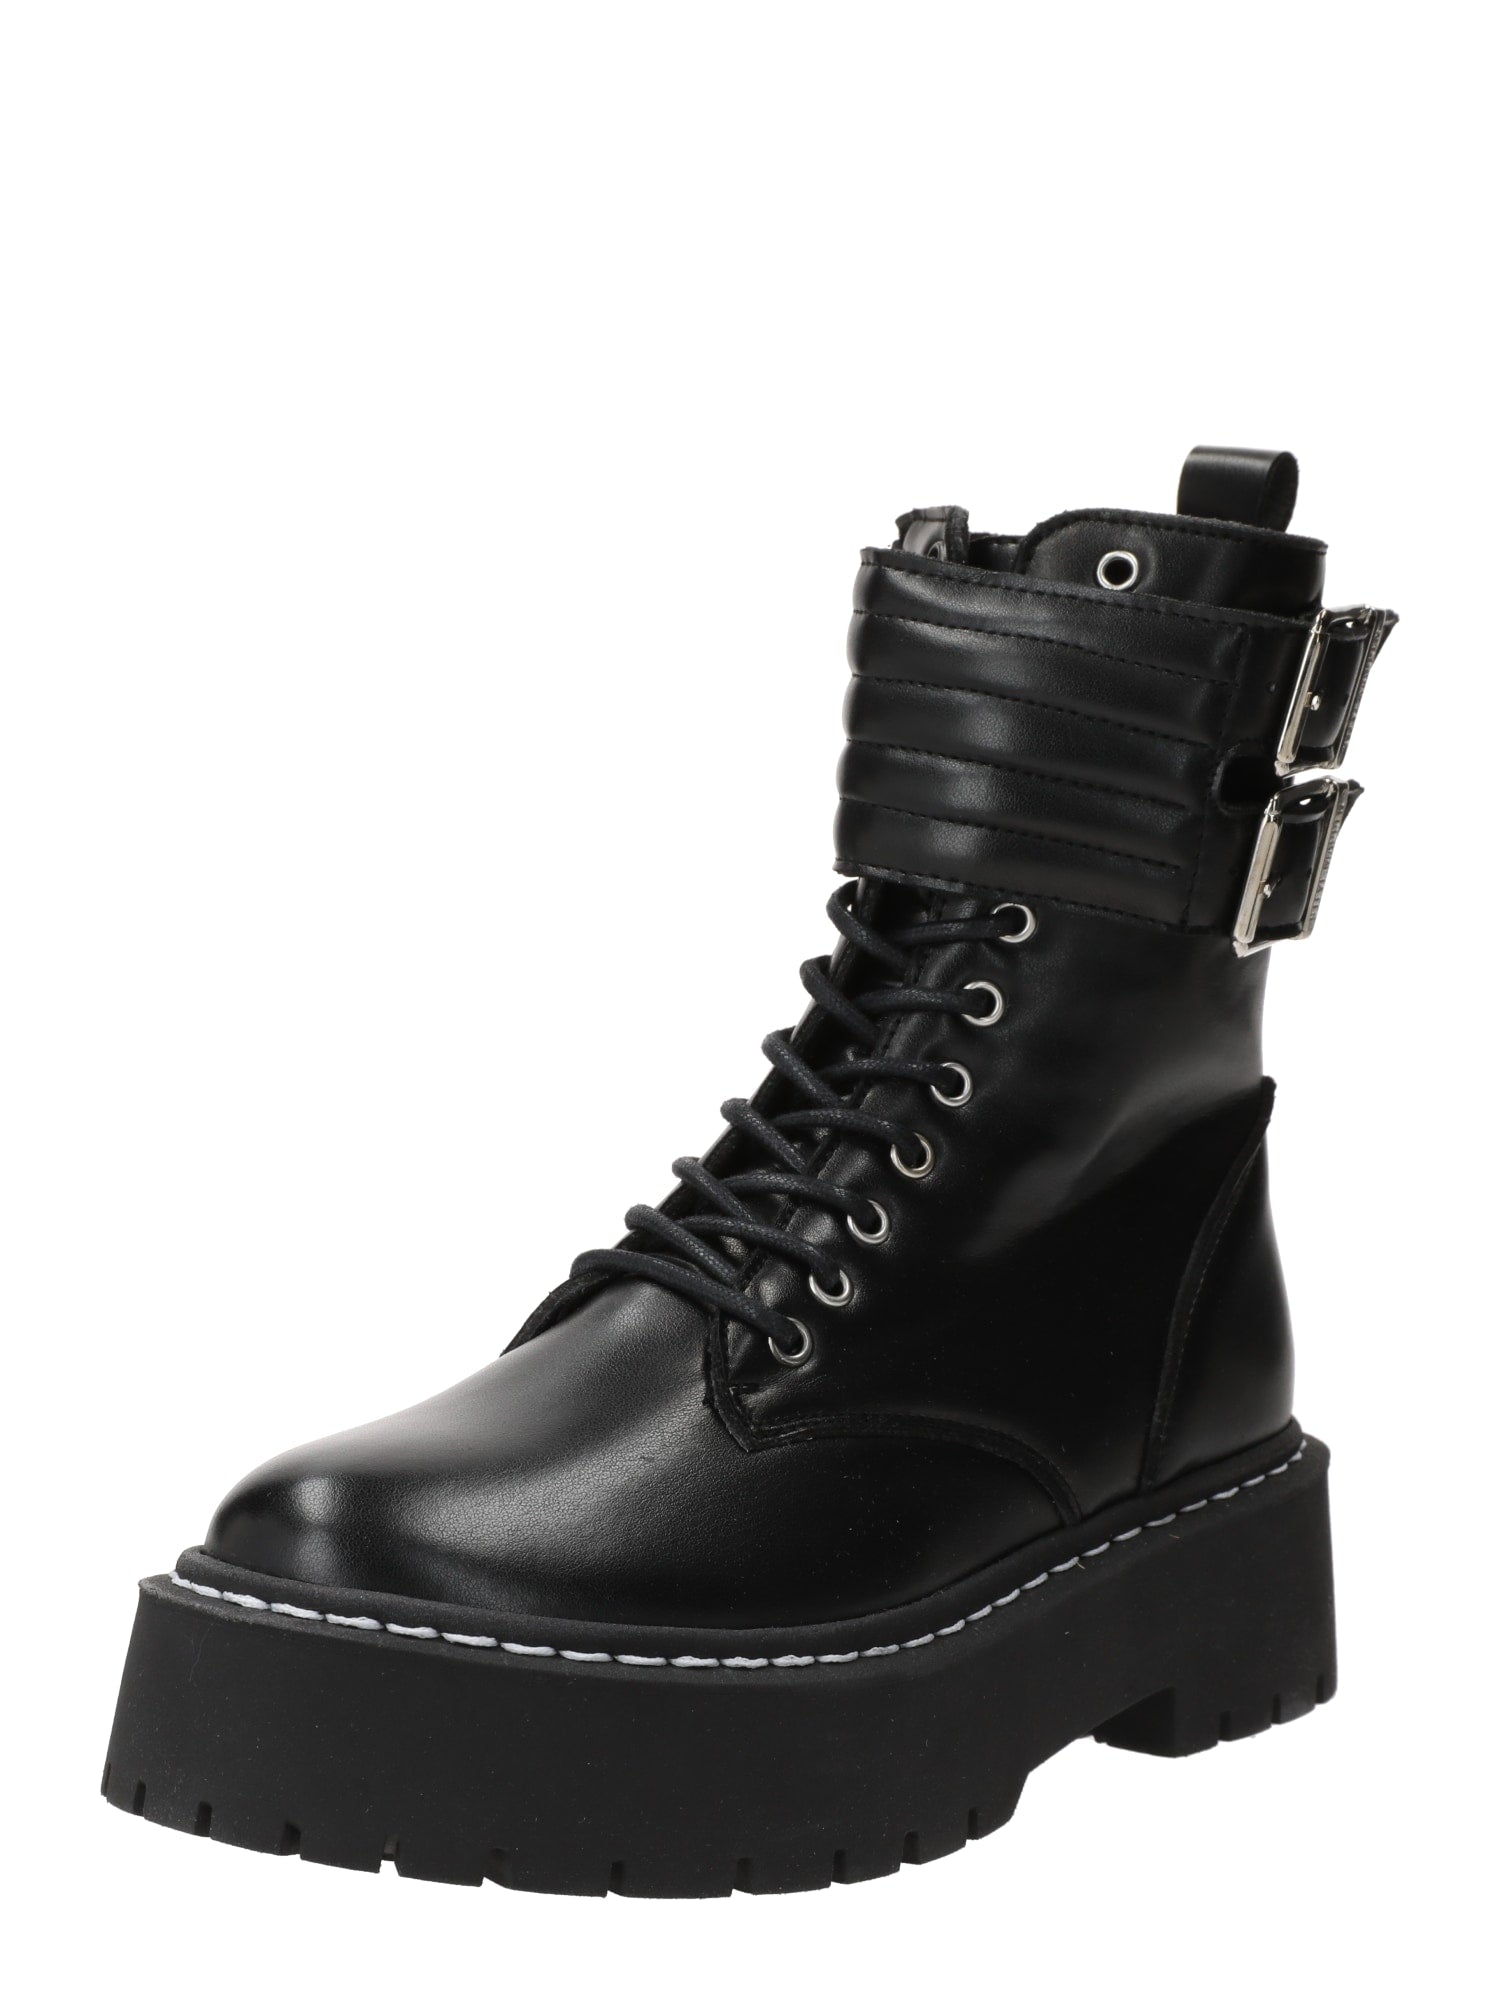 Viade Bootie Black Action Leather